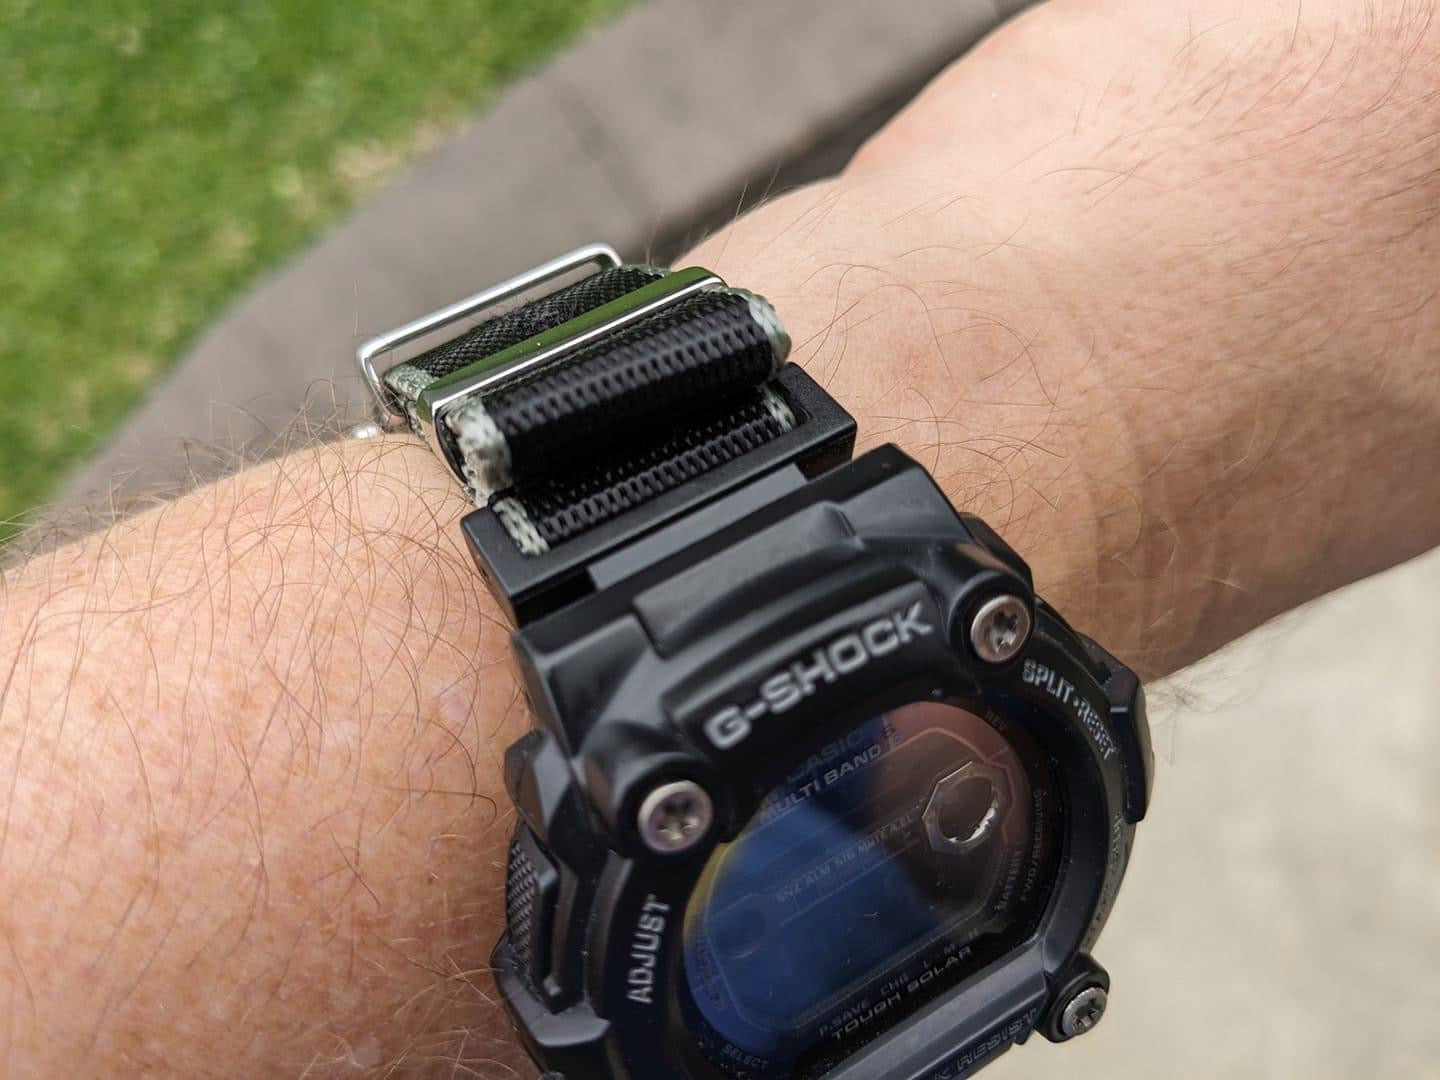 G-Shock 16mm to 22mm Adapter